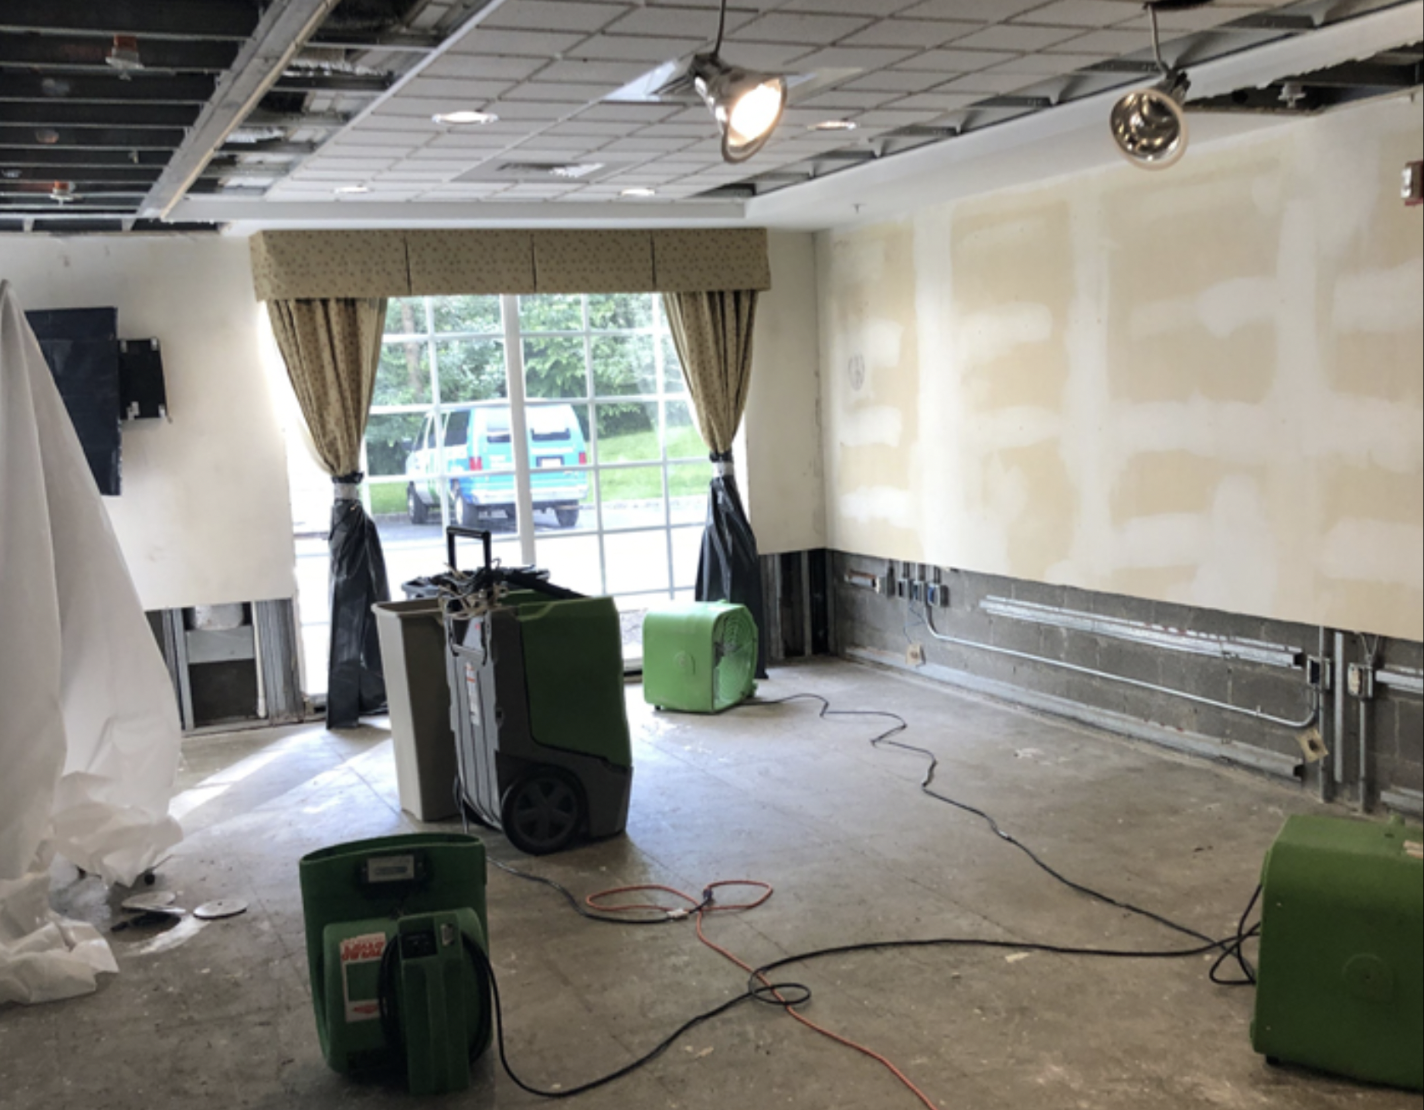 Water damage mitigation equipment setup for local business in East Windsor New Jersey